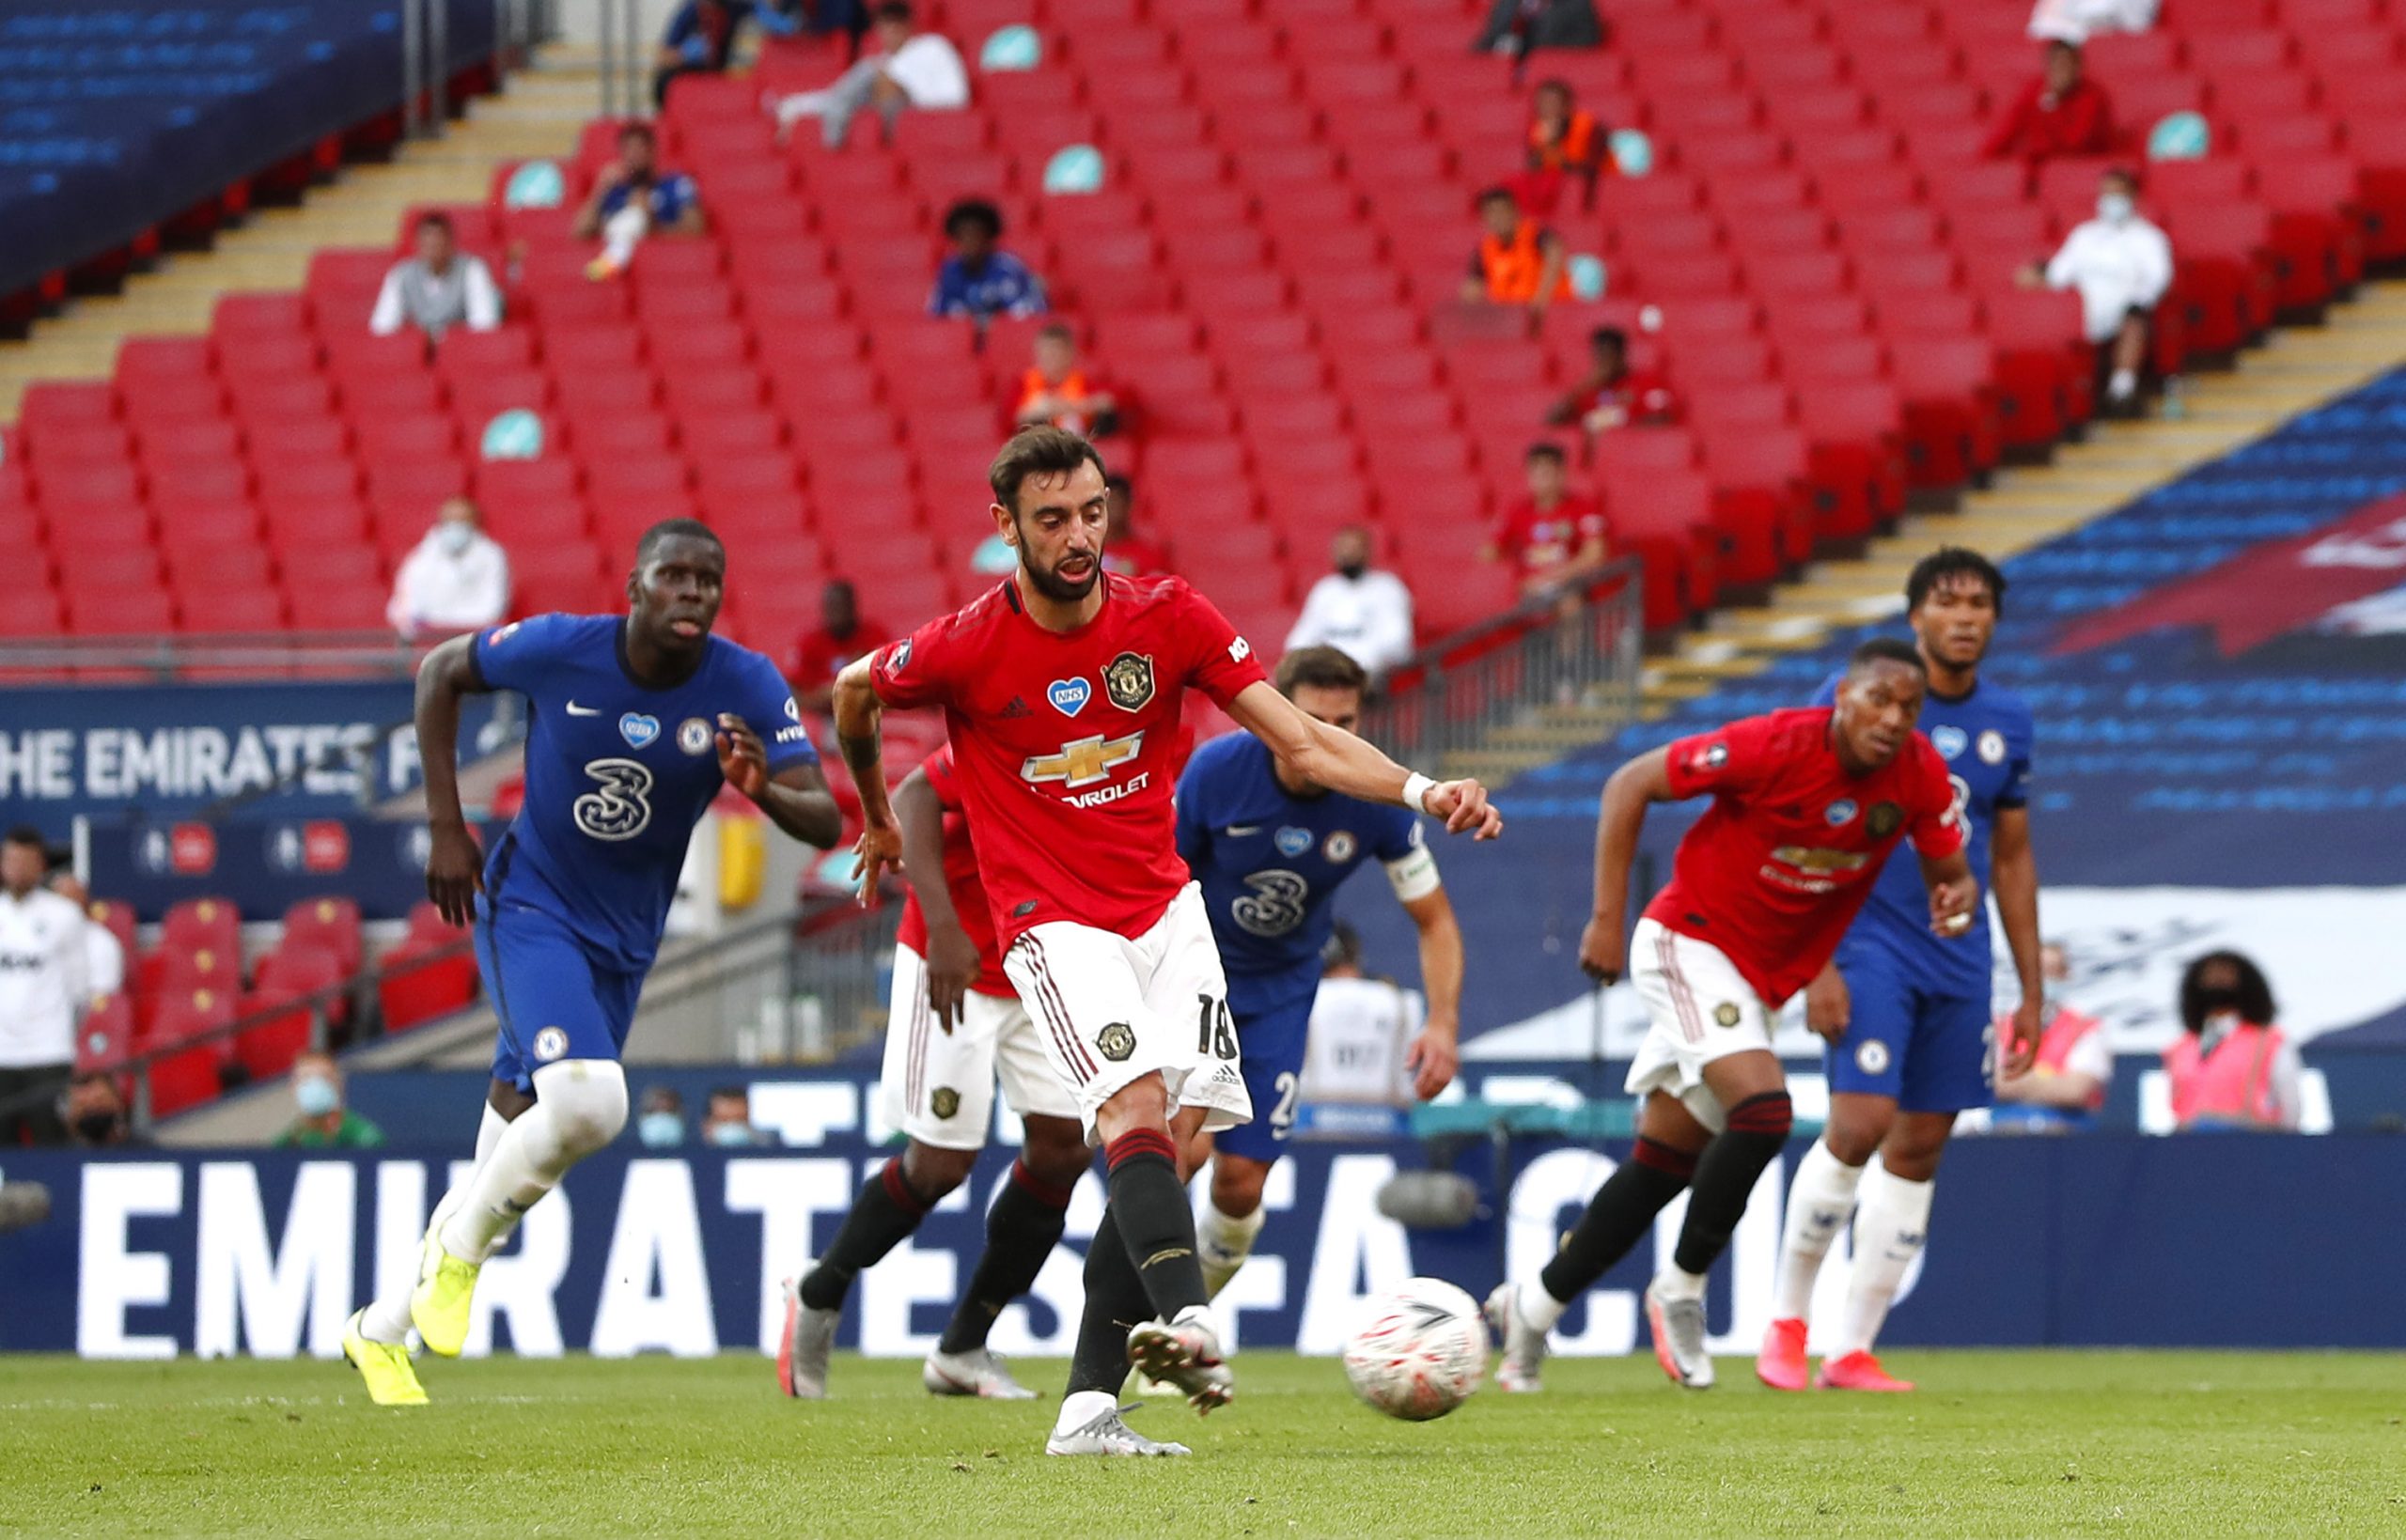 4-2-3-1 Manchester United Predicted Lineup Vs Sevilla (Man United's Bruno Fernandes in action in the picture)